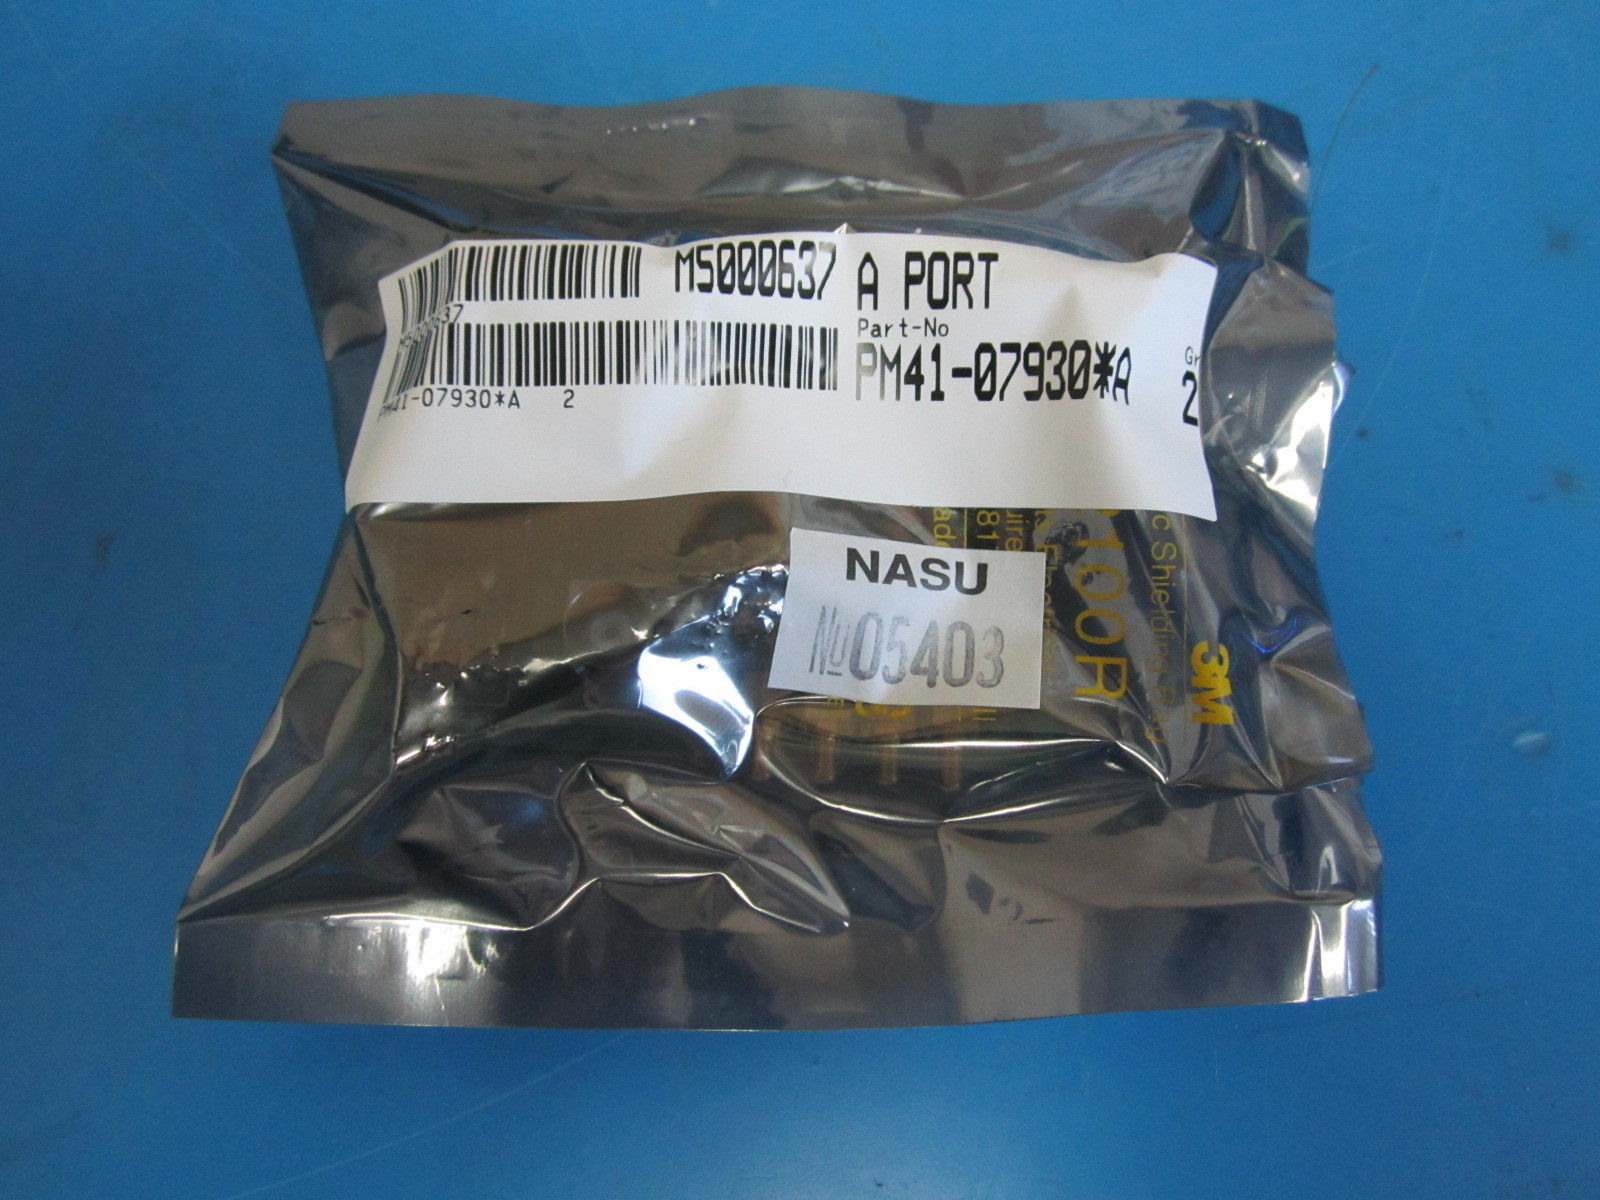 NEW SEALED Toshiba Array Port PM41-07930-2 A Ultrasound Imaging Part DIAGNOSTIC ULTRASOUND MACHINES FOR SALE